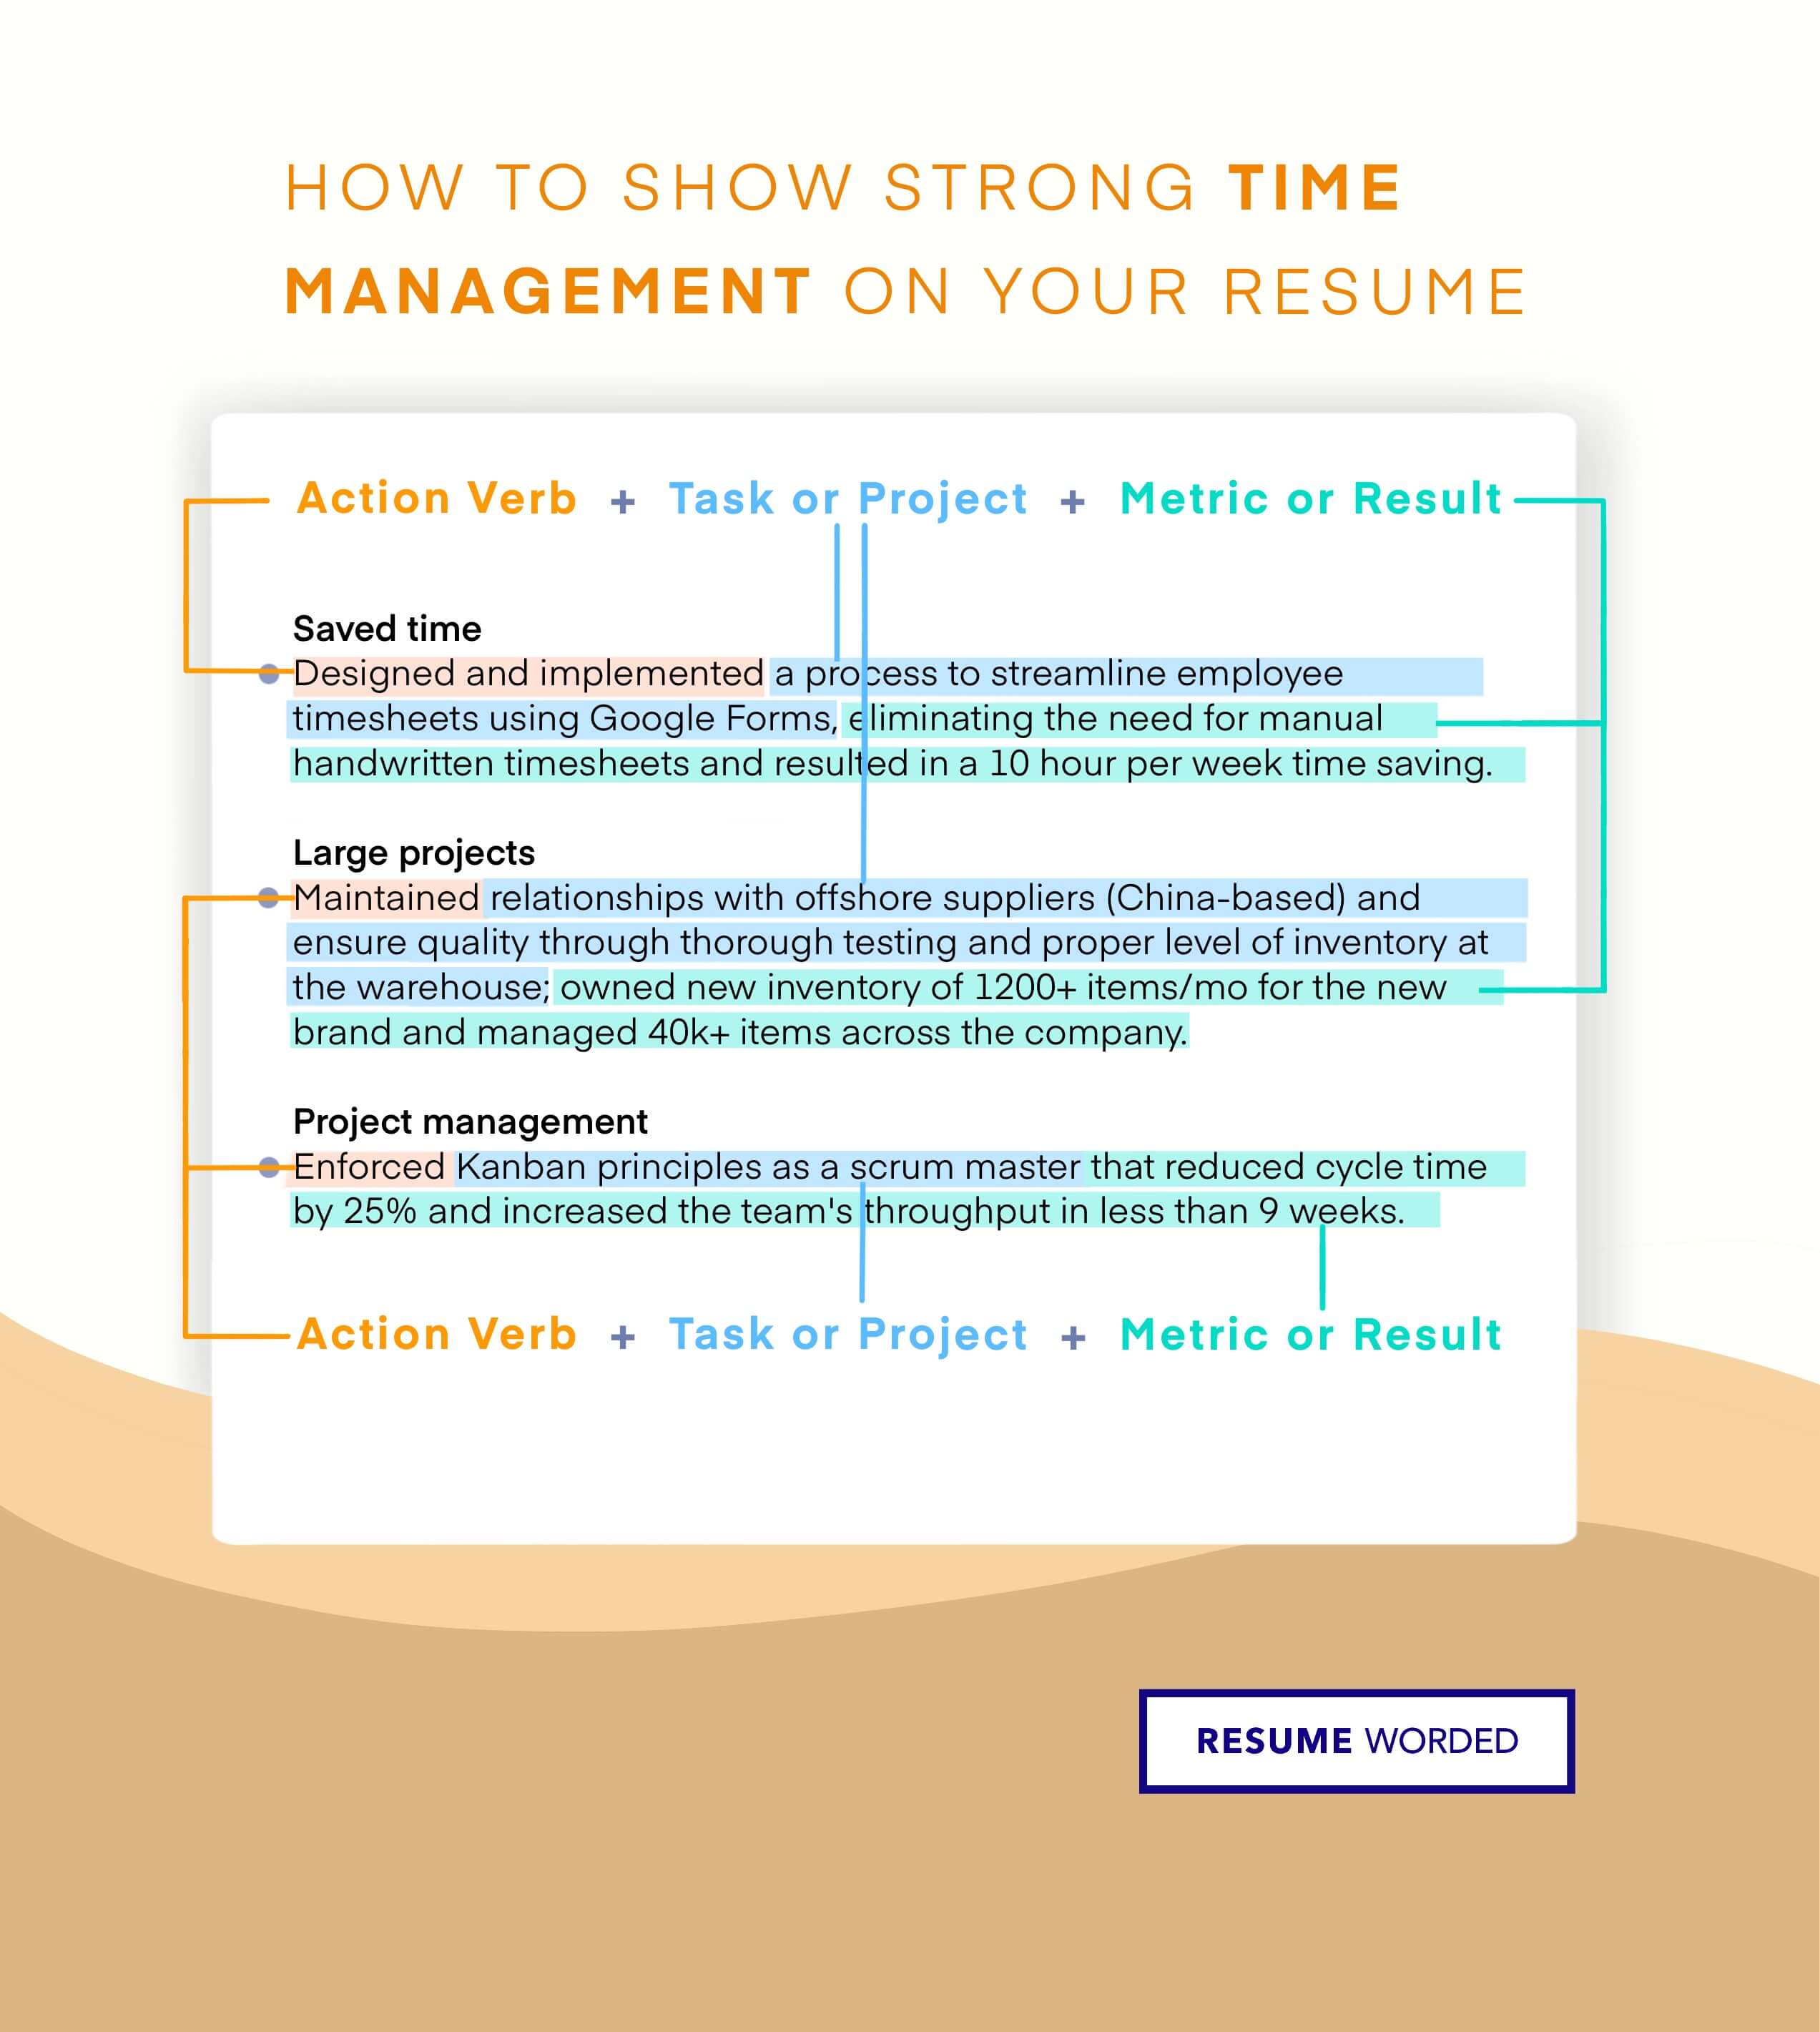 Indicate your time management skills. - B2B Sales Rep Resume